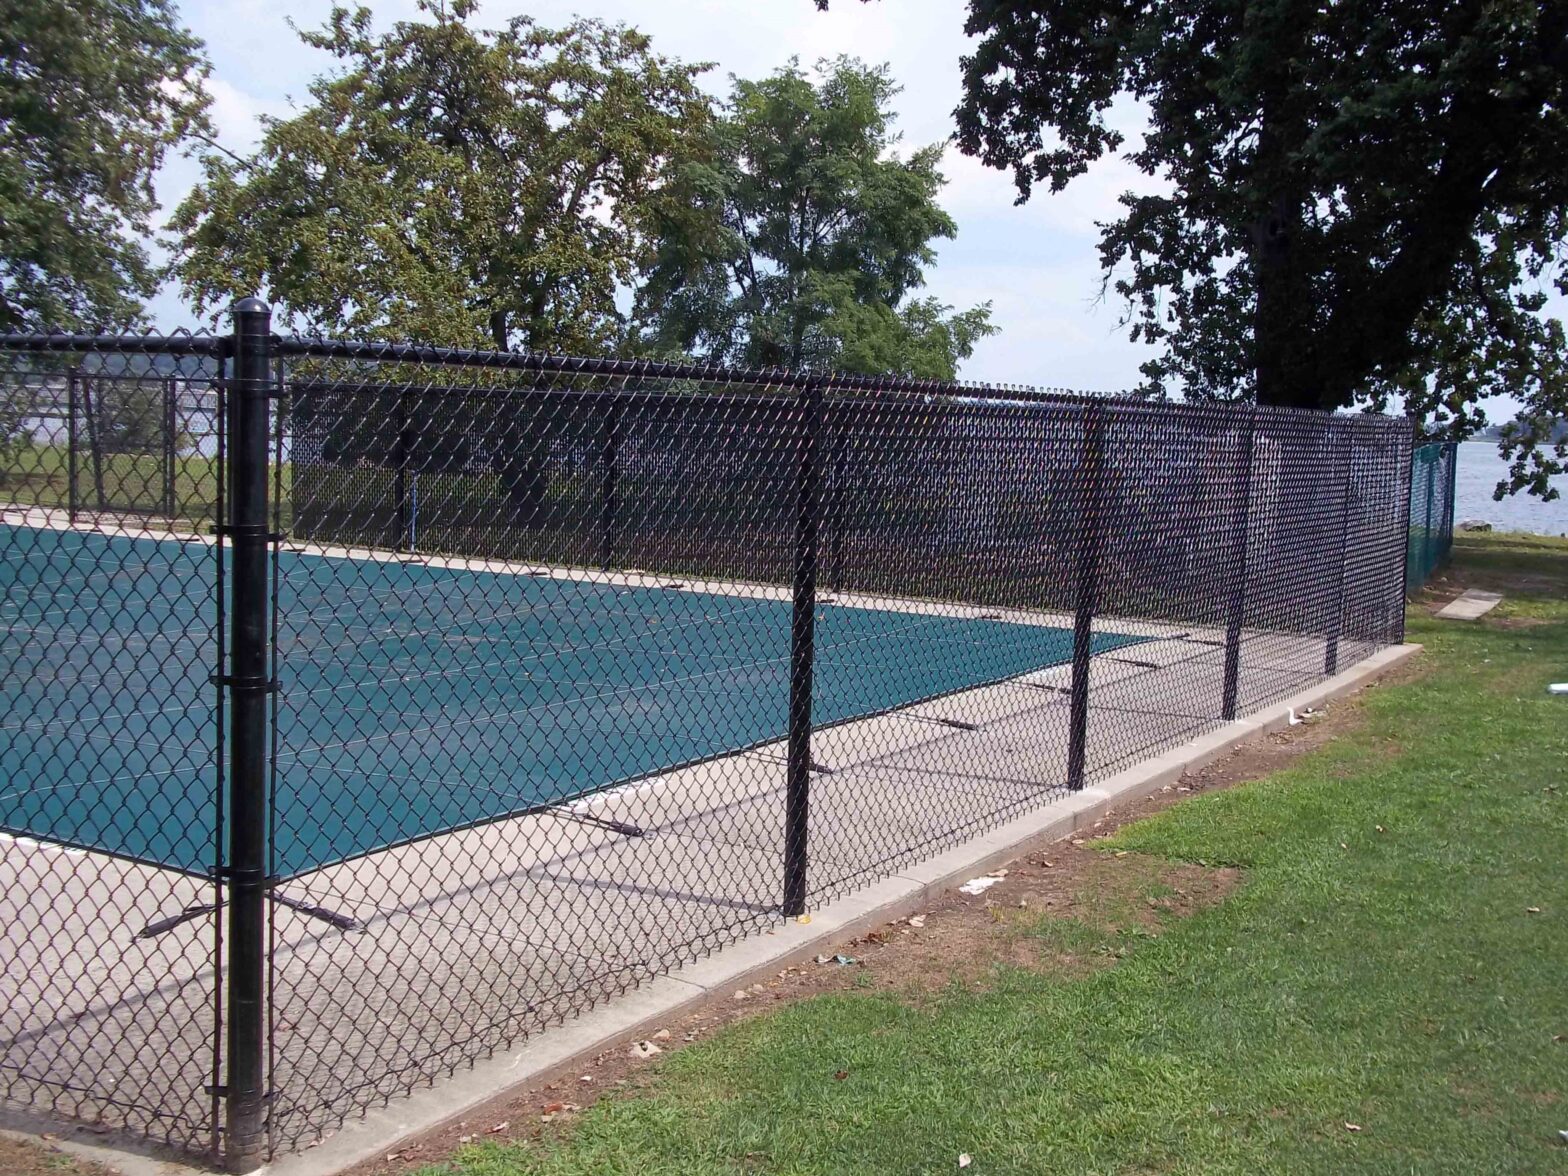 Photo of a chain link fence in Mahopac, New York